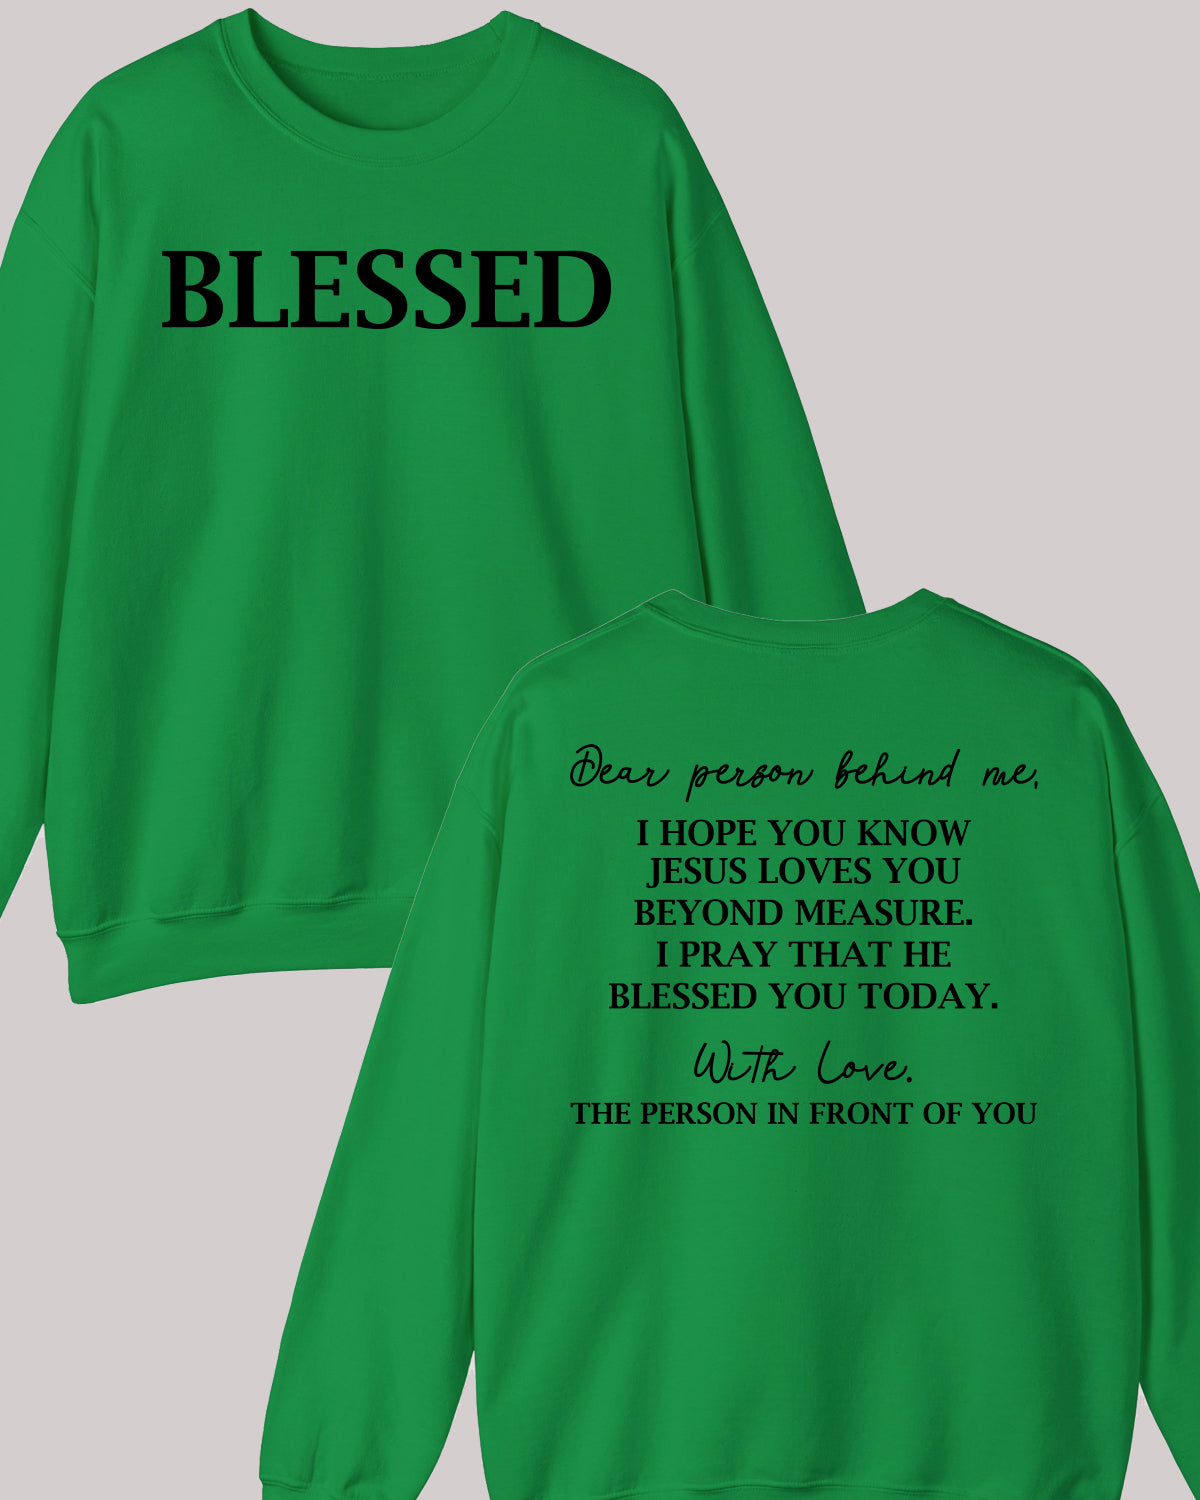 Dear Person Behind Me Christian Bible Verse Sweatshirts Front and Back Print